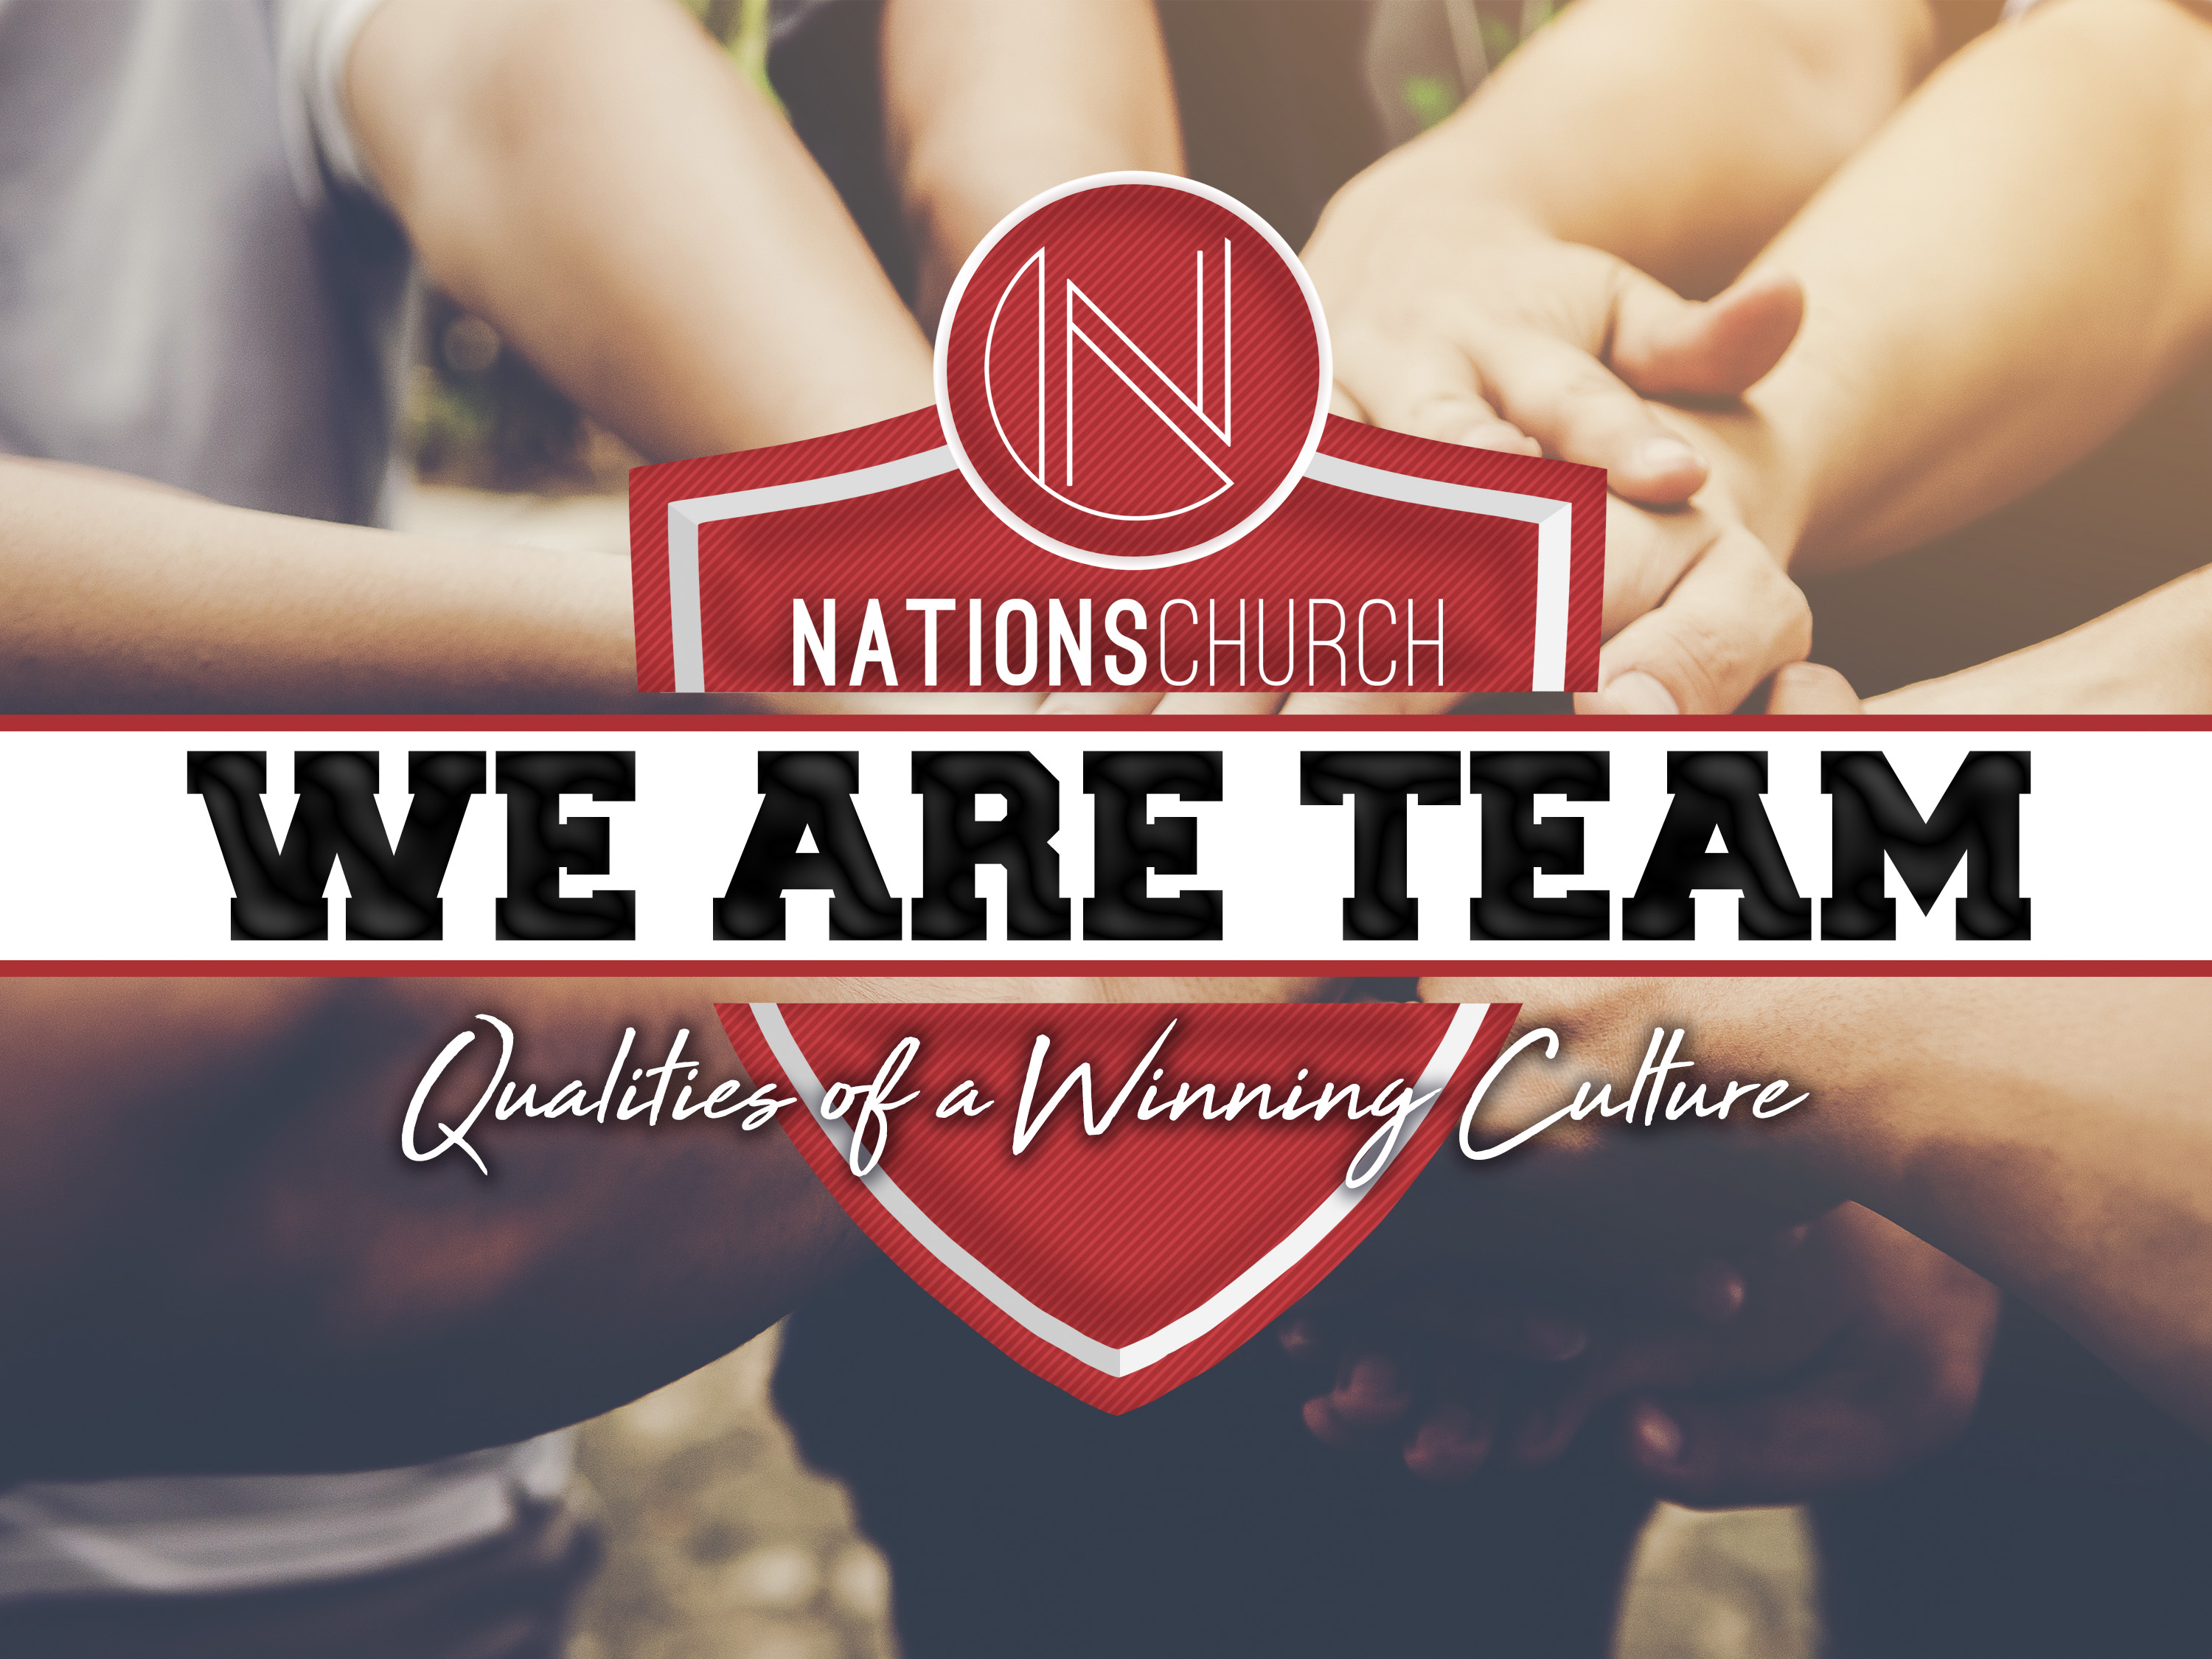 We Are Team Series Nations Church Athens GA